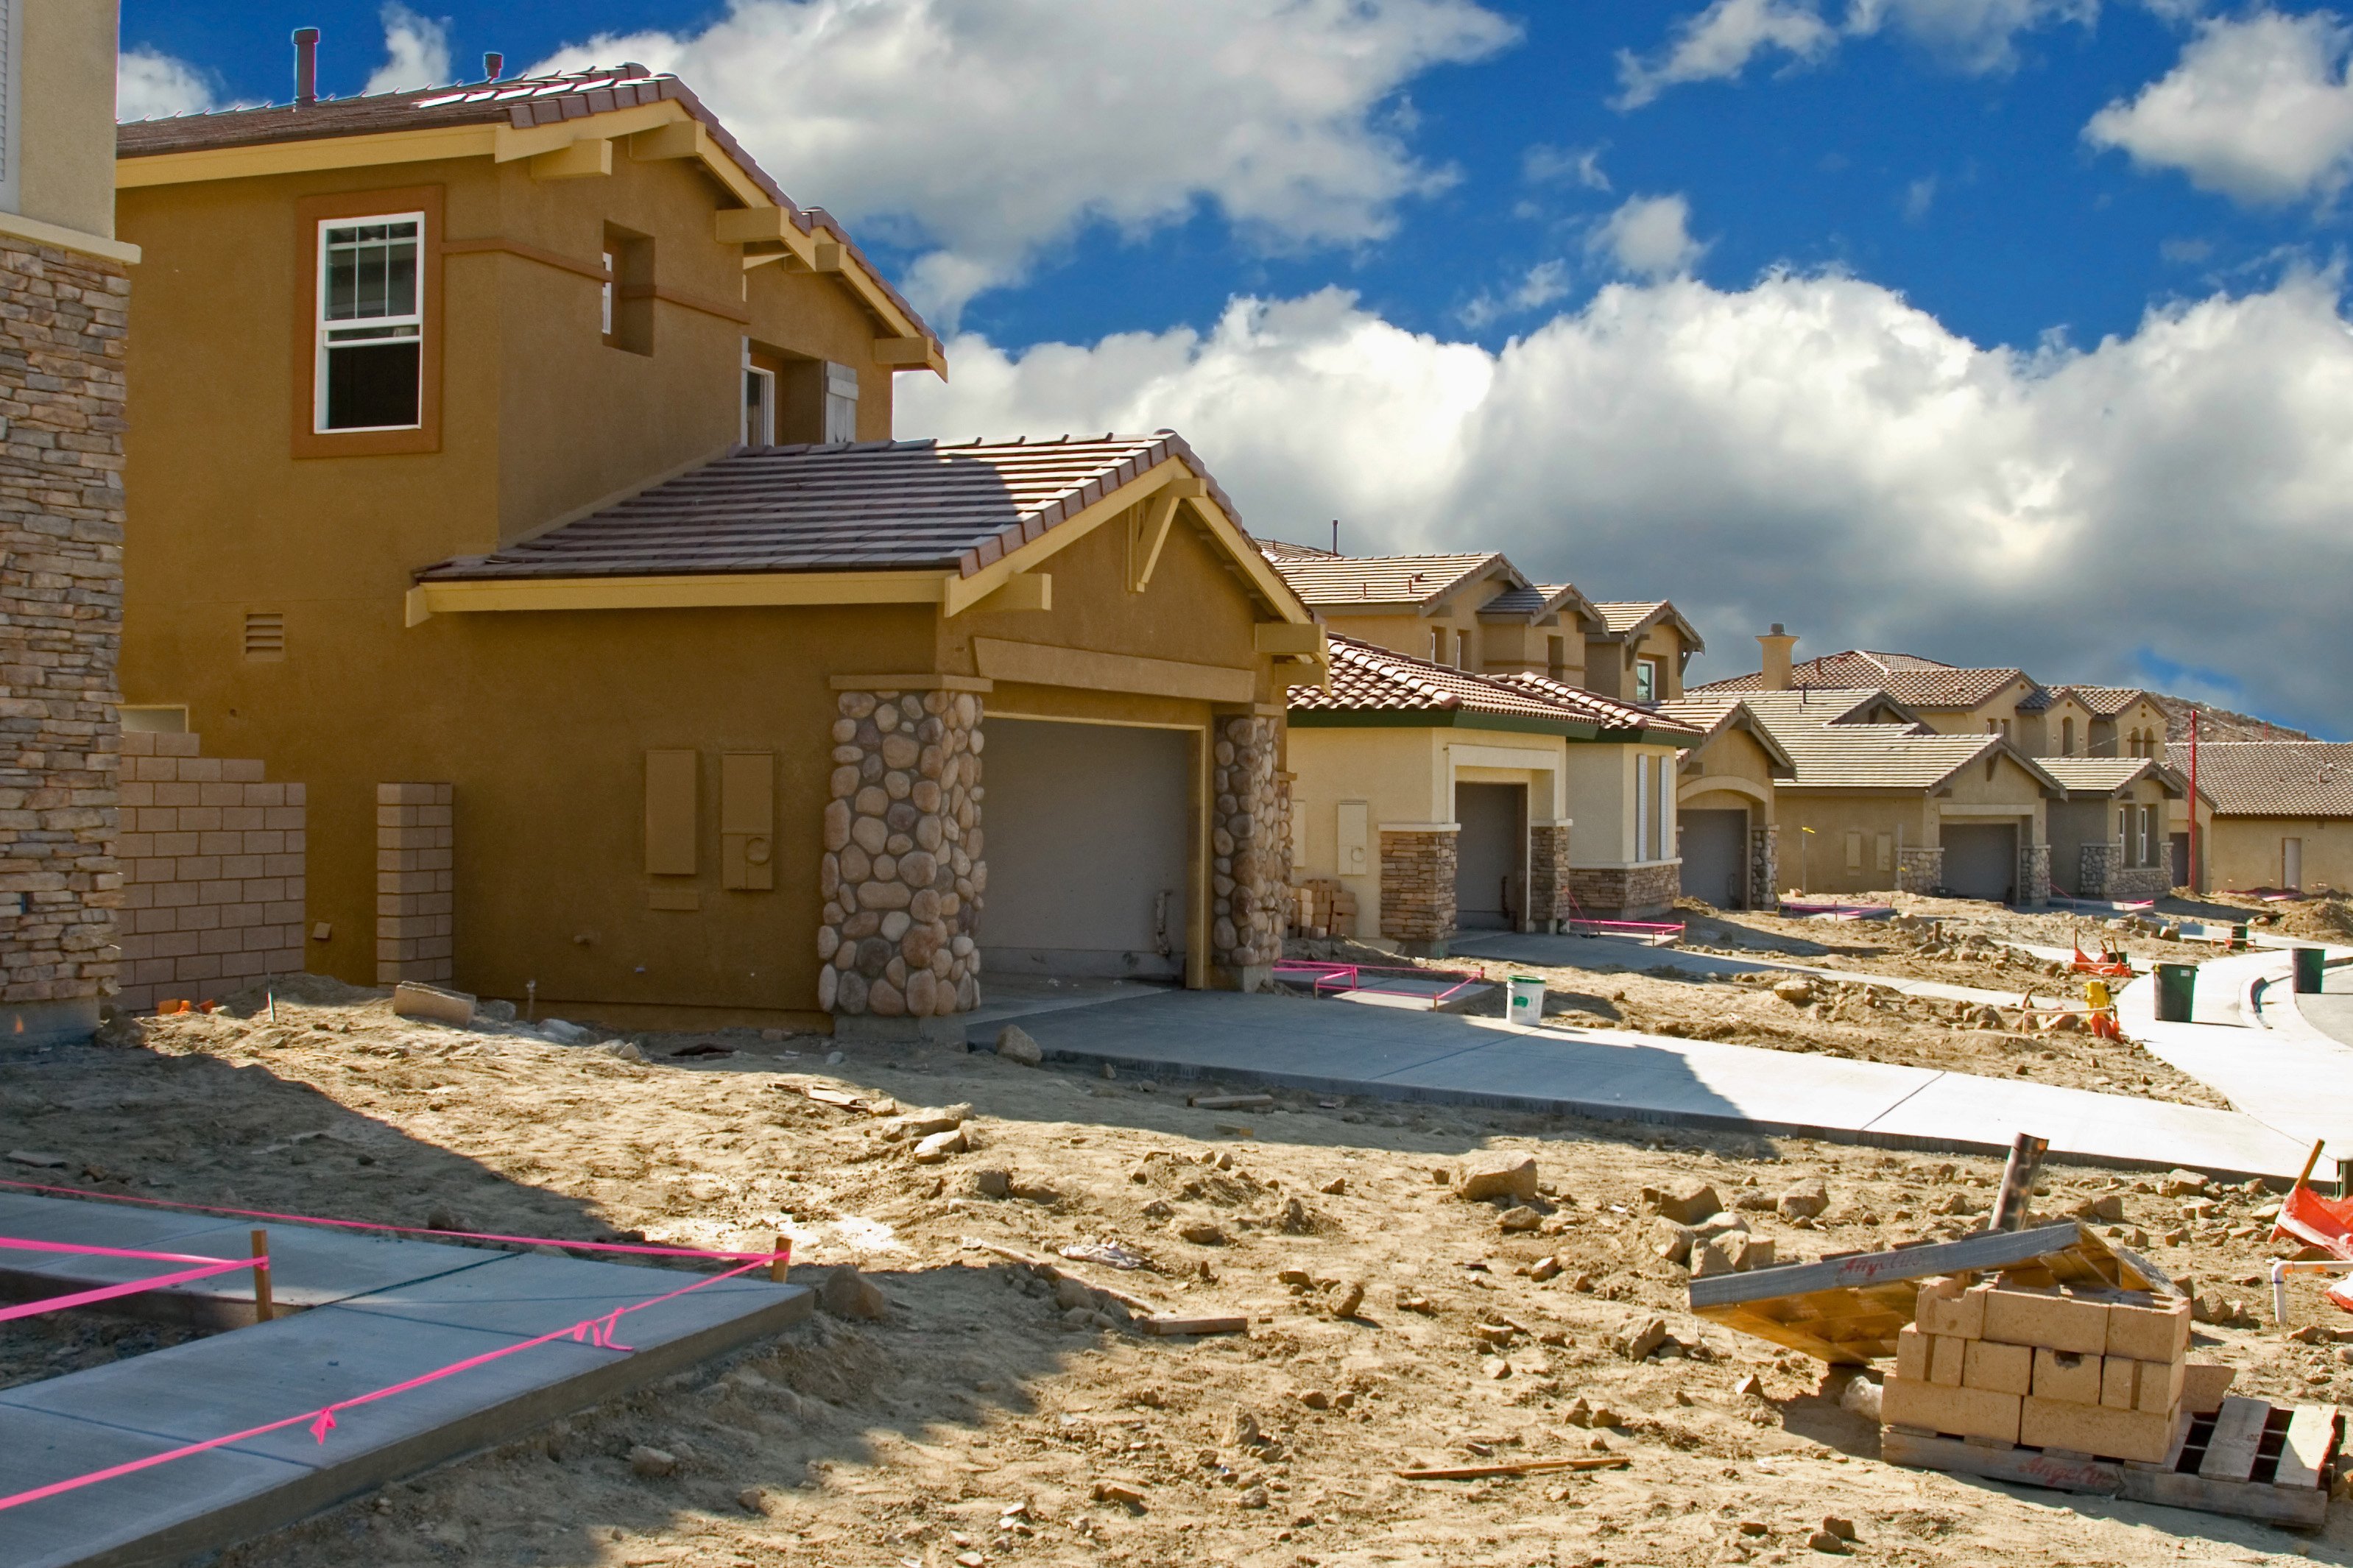 Report: U.S. homebuilders have failed to keep up with population growth